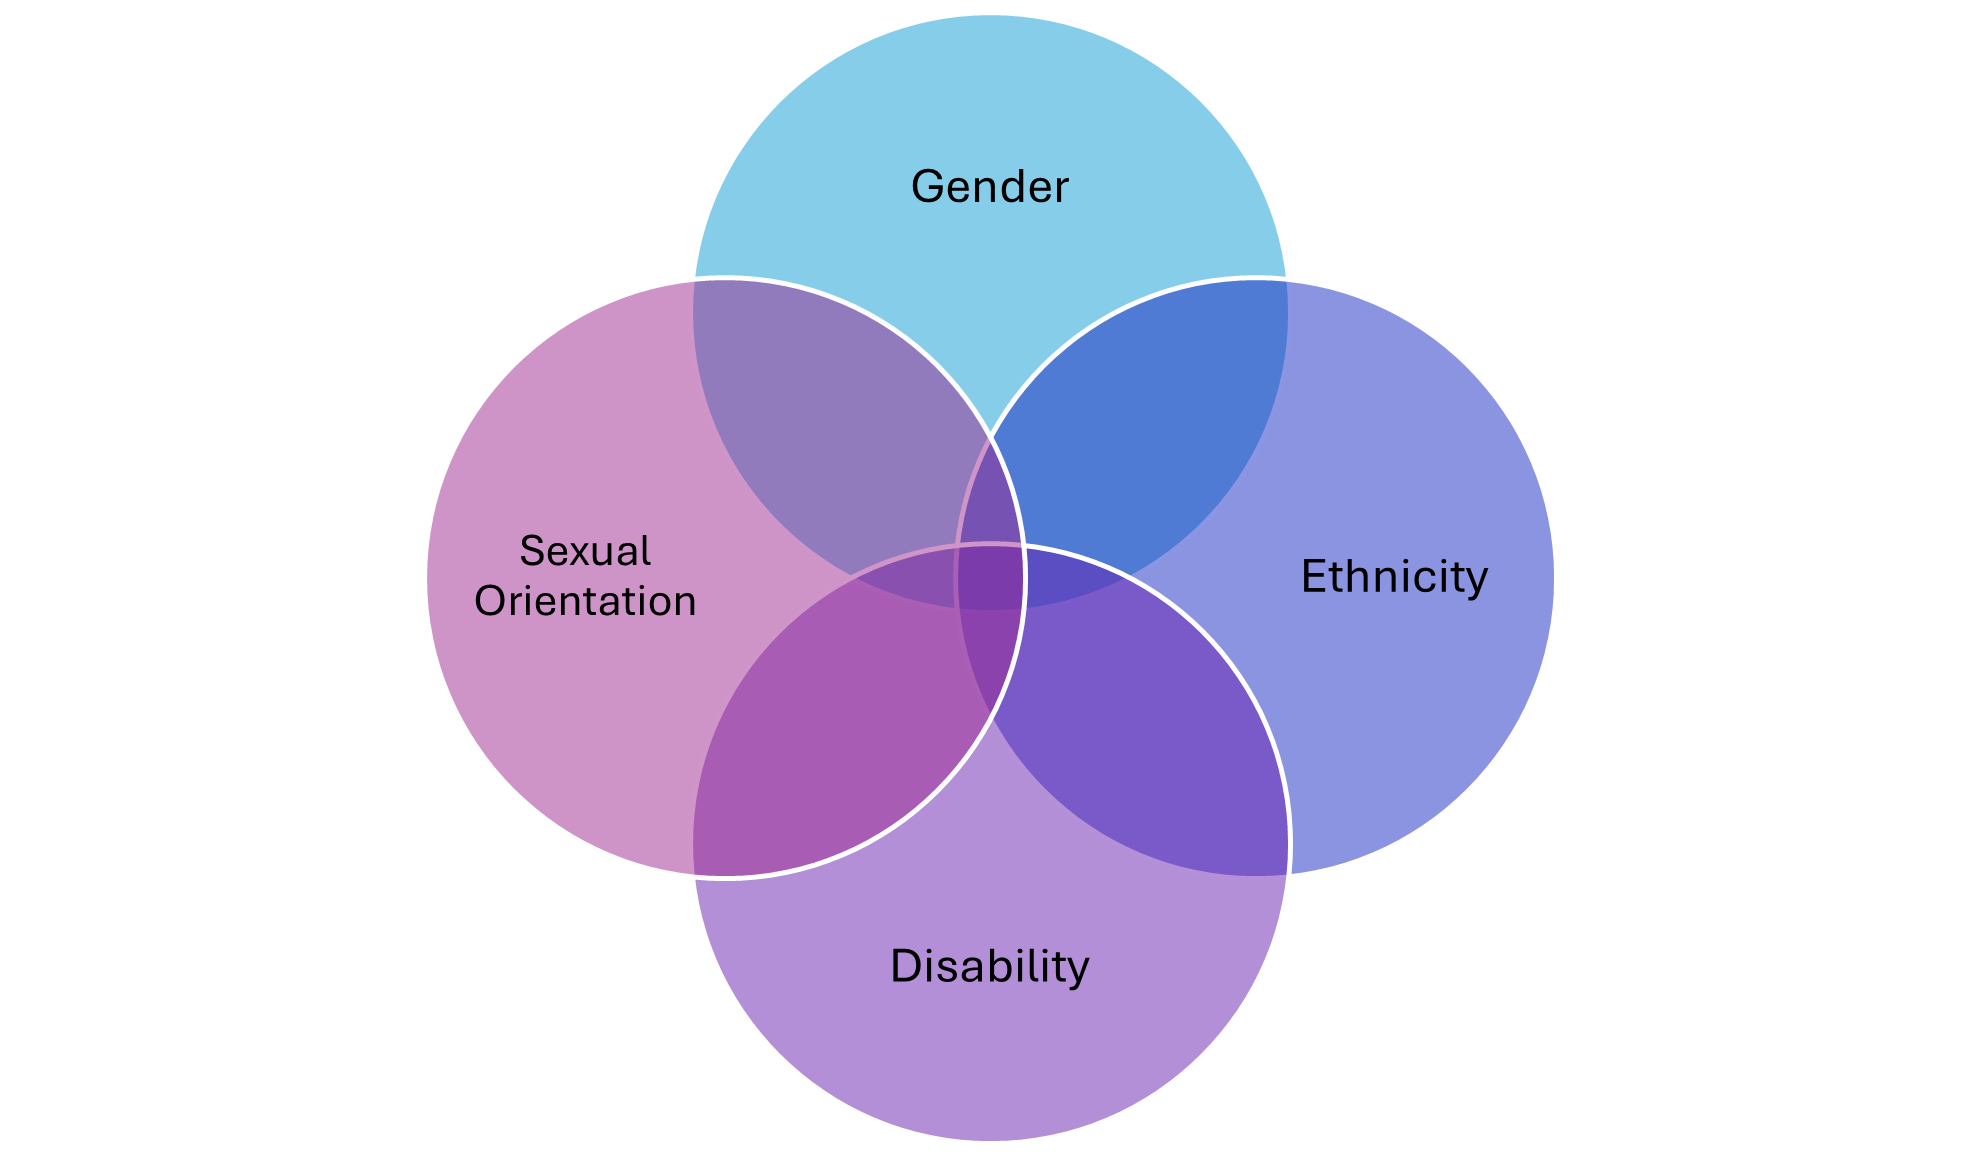 A venn diagram showing how gender, ethnicity, disability and sexual orientation can all overlap.